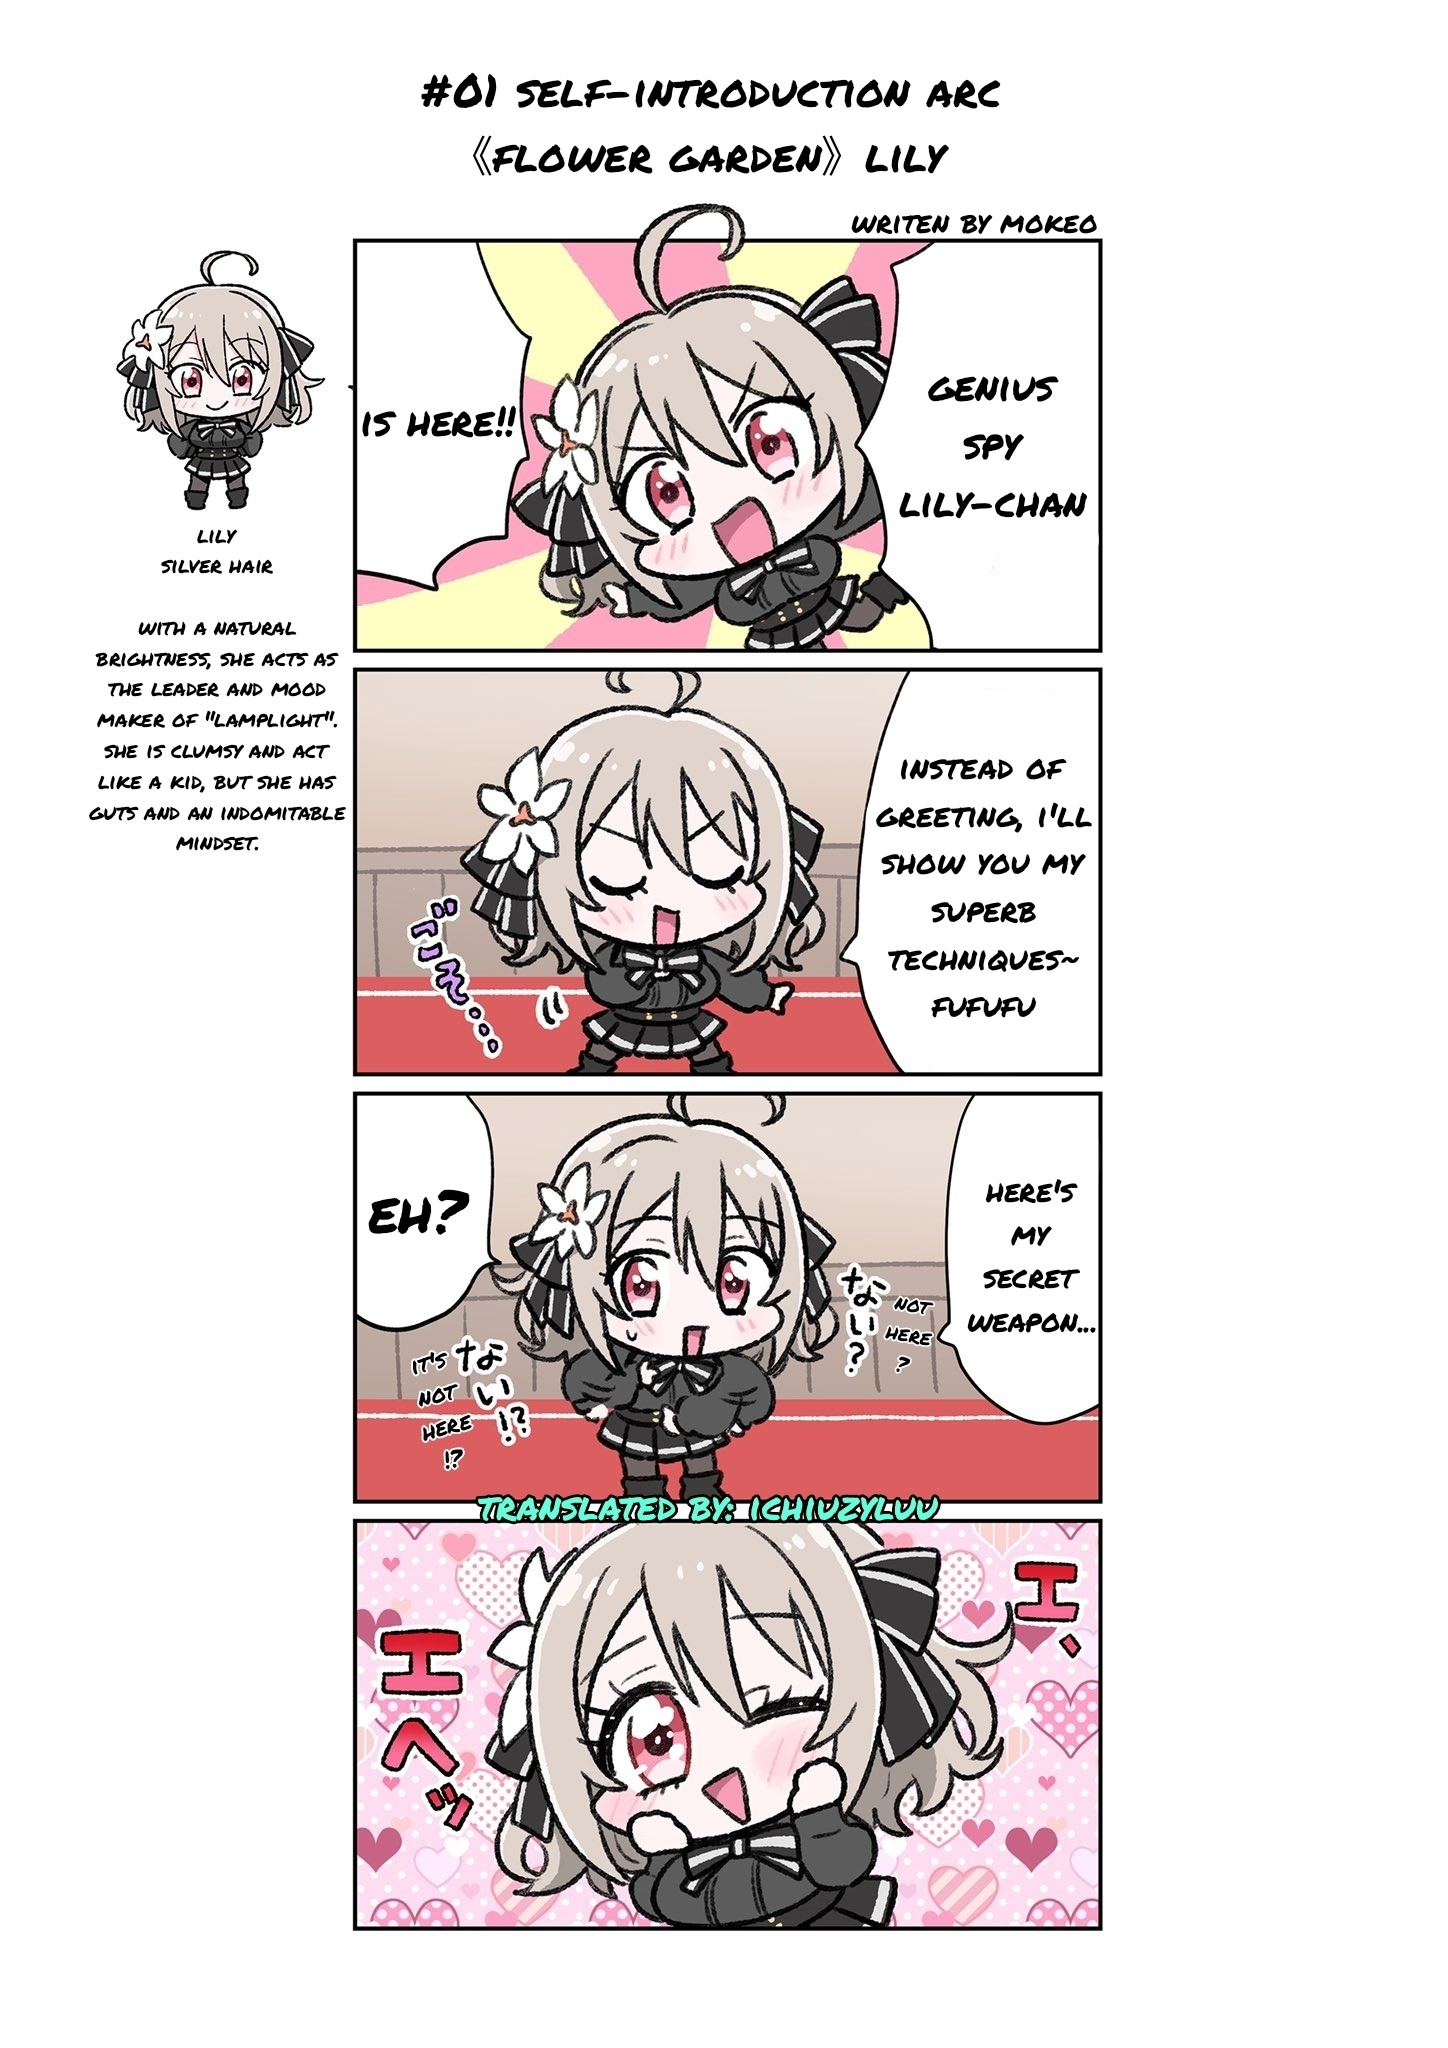 Spy Room 4-Koma Chapter 1: Self-Introduction Arc: Flower Garden/lily - Picture 1